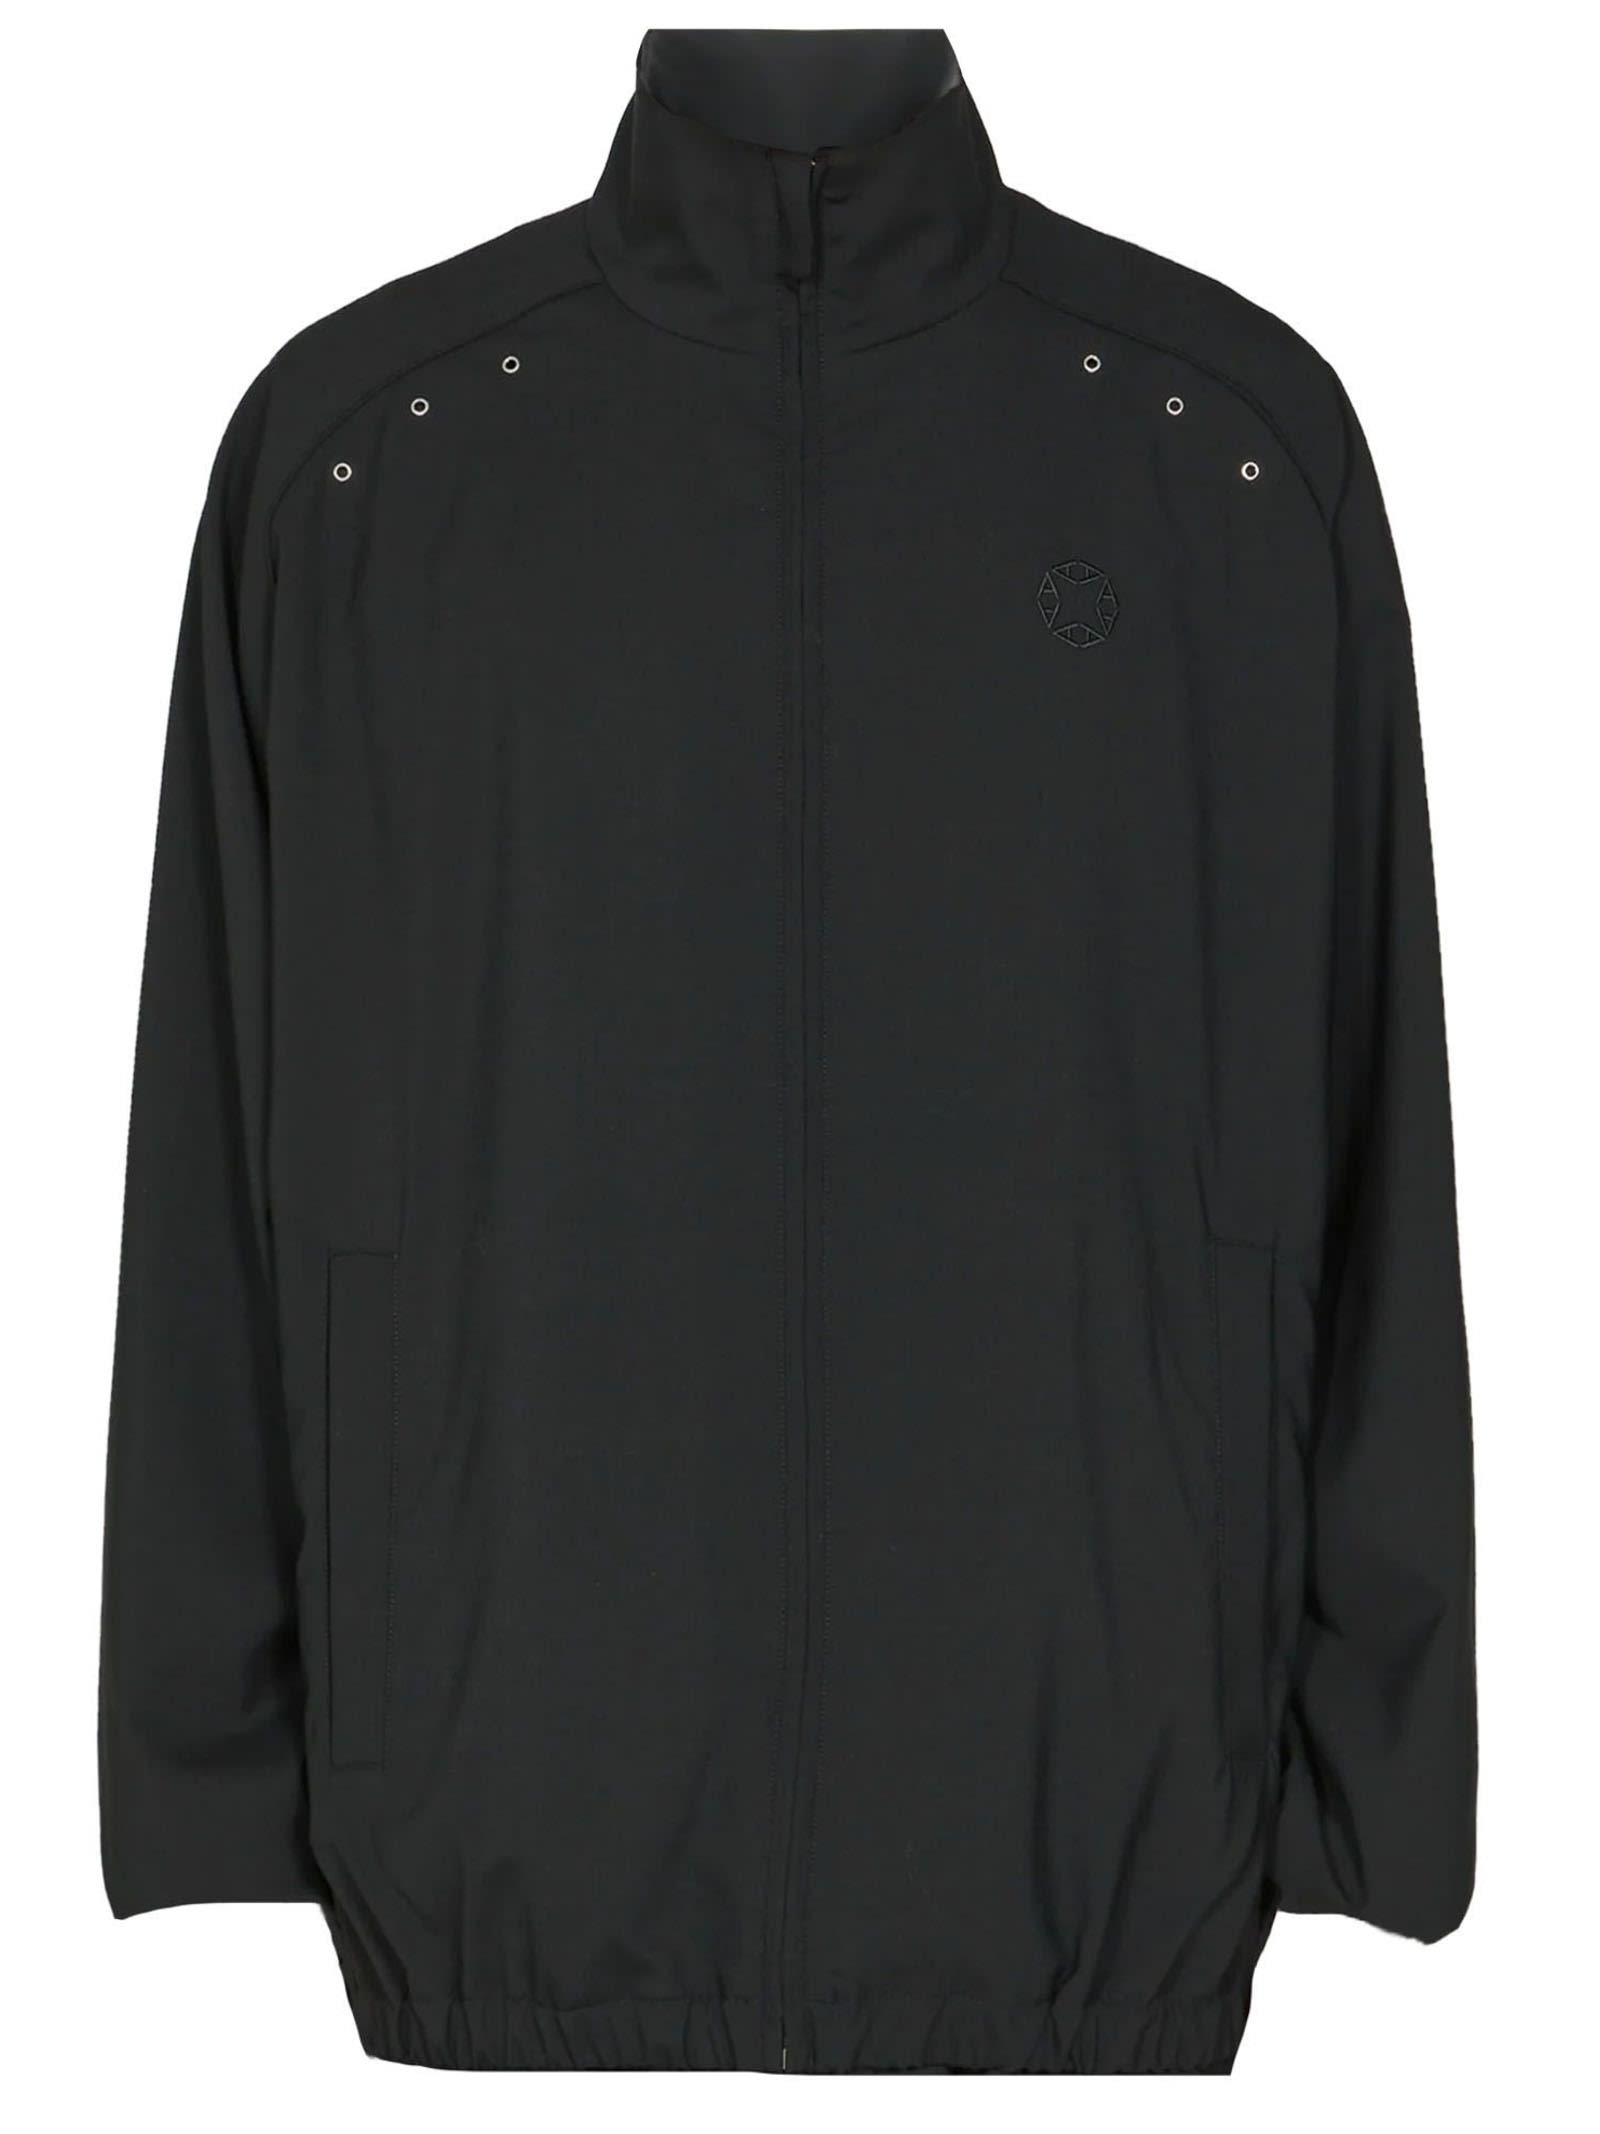 ALYX TRACKTOP IN TAILORING FABRIC